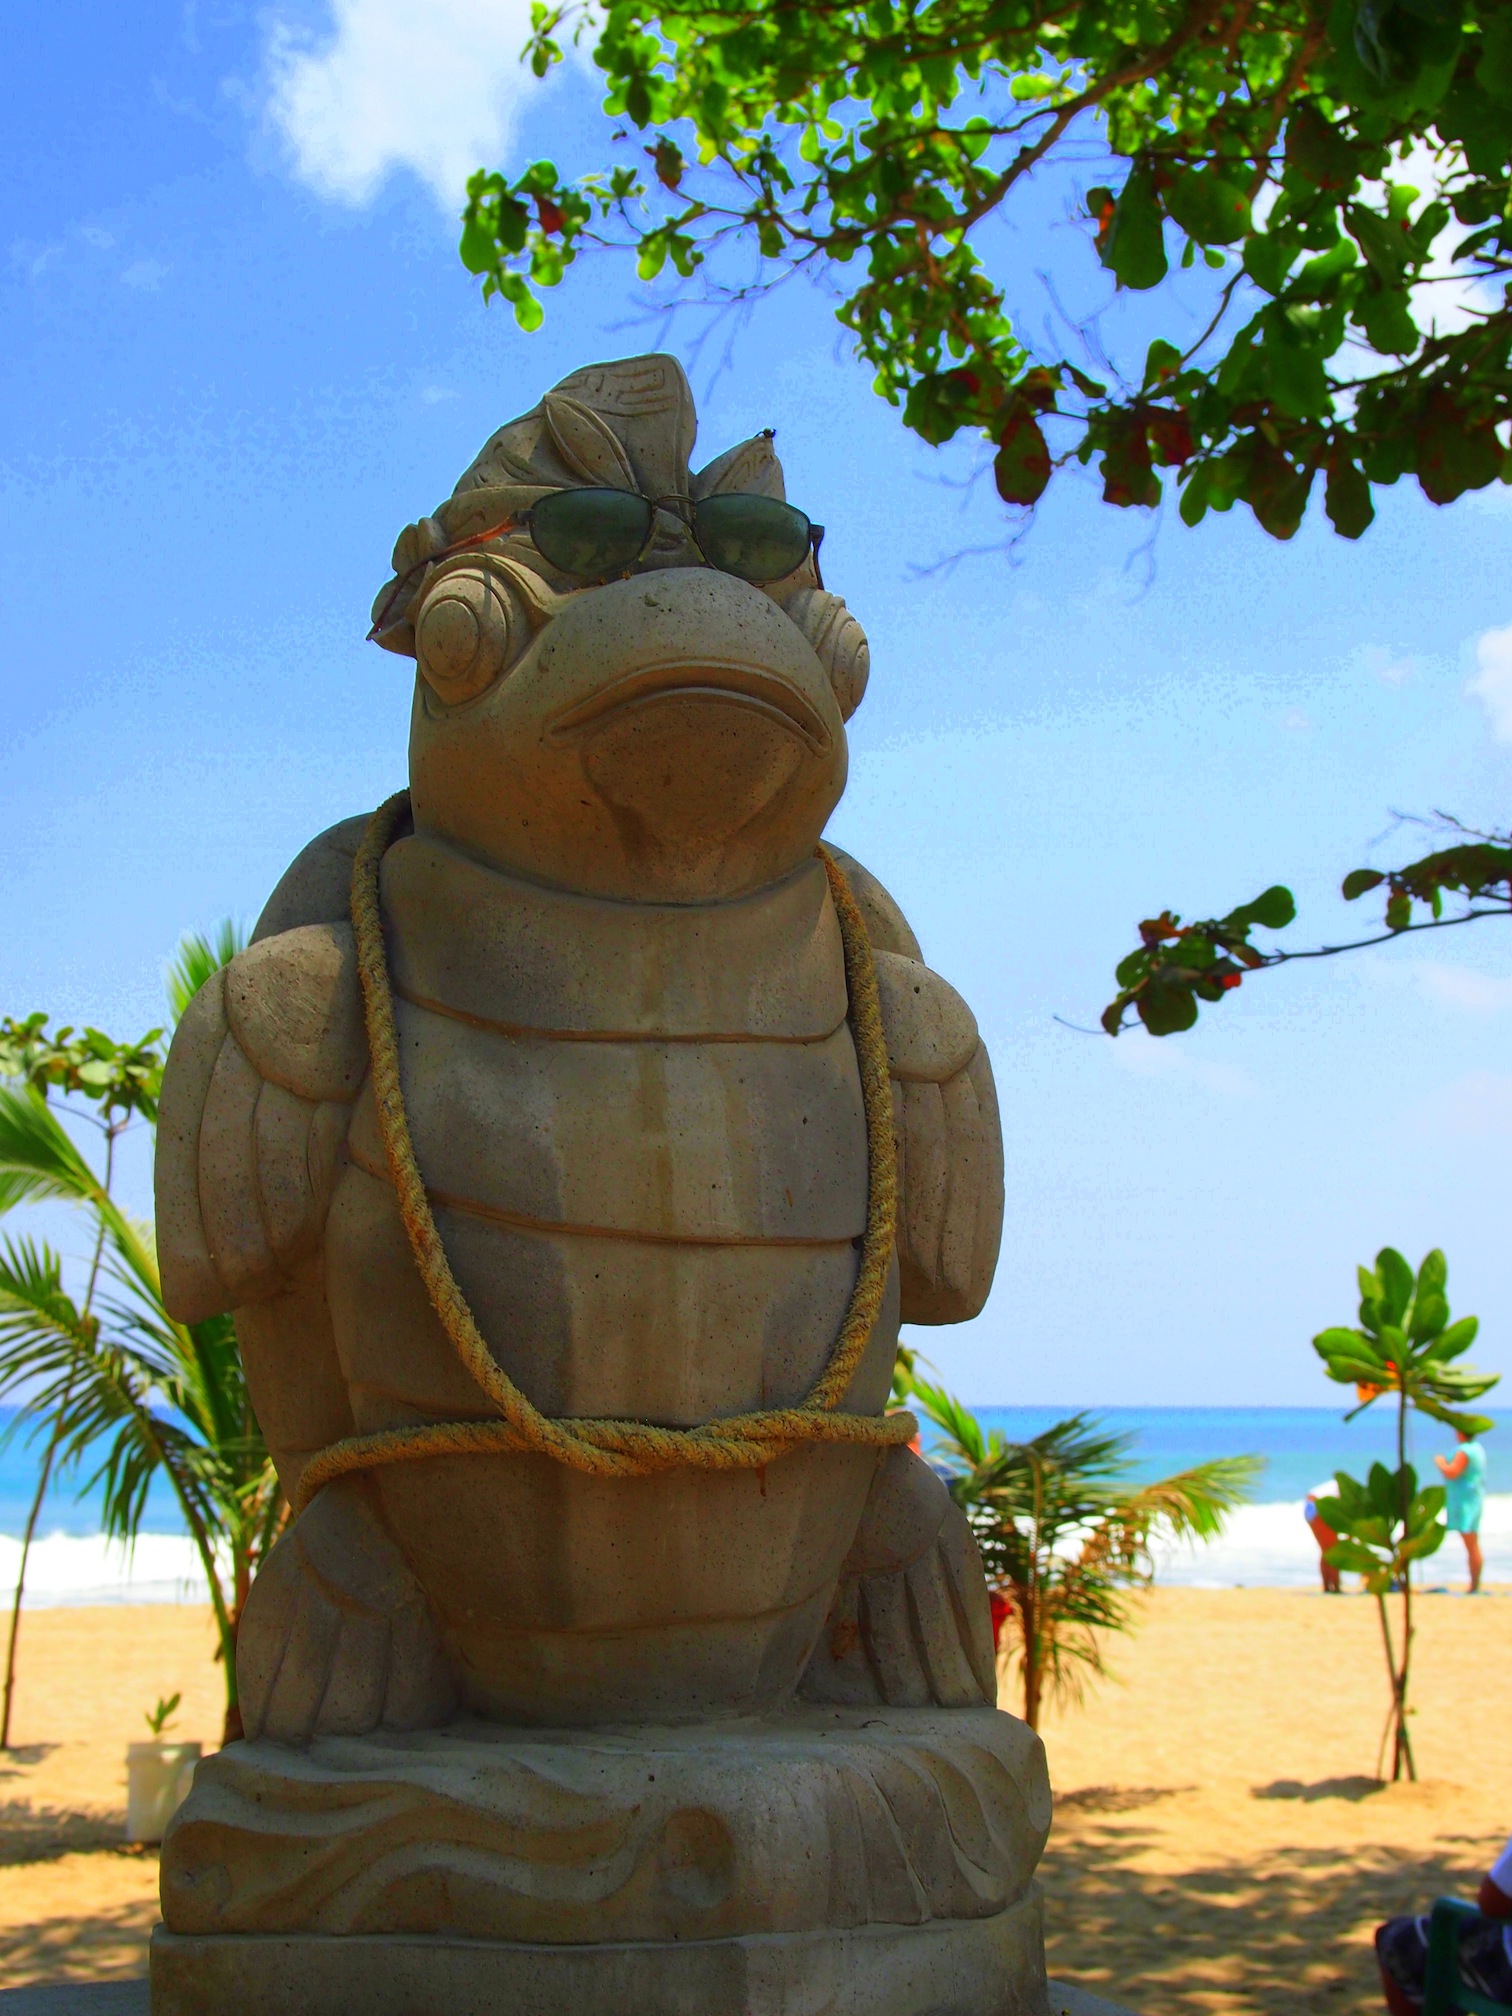 a turtle statue sitting on top of a sandy beach